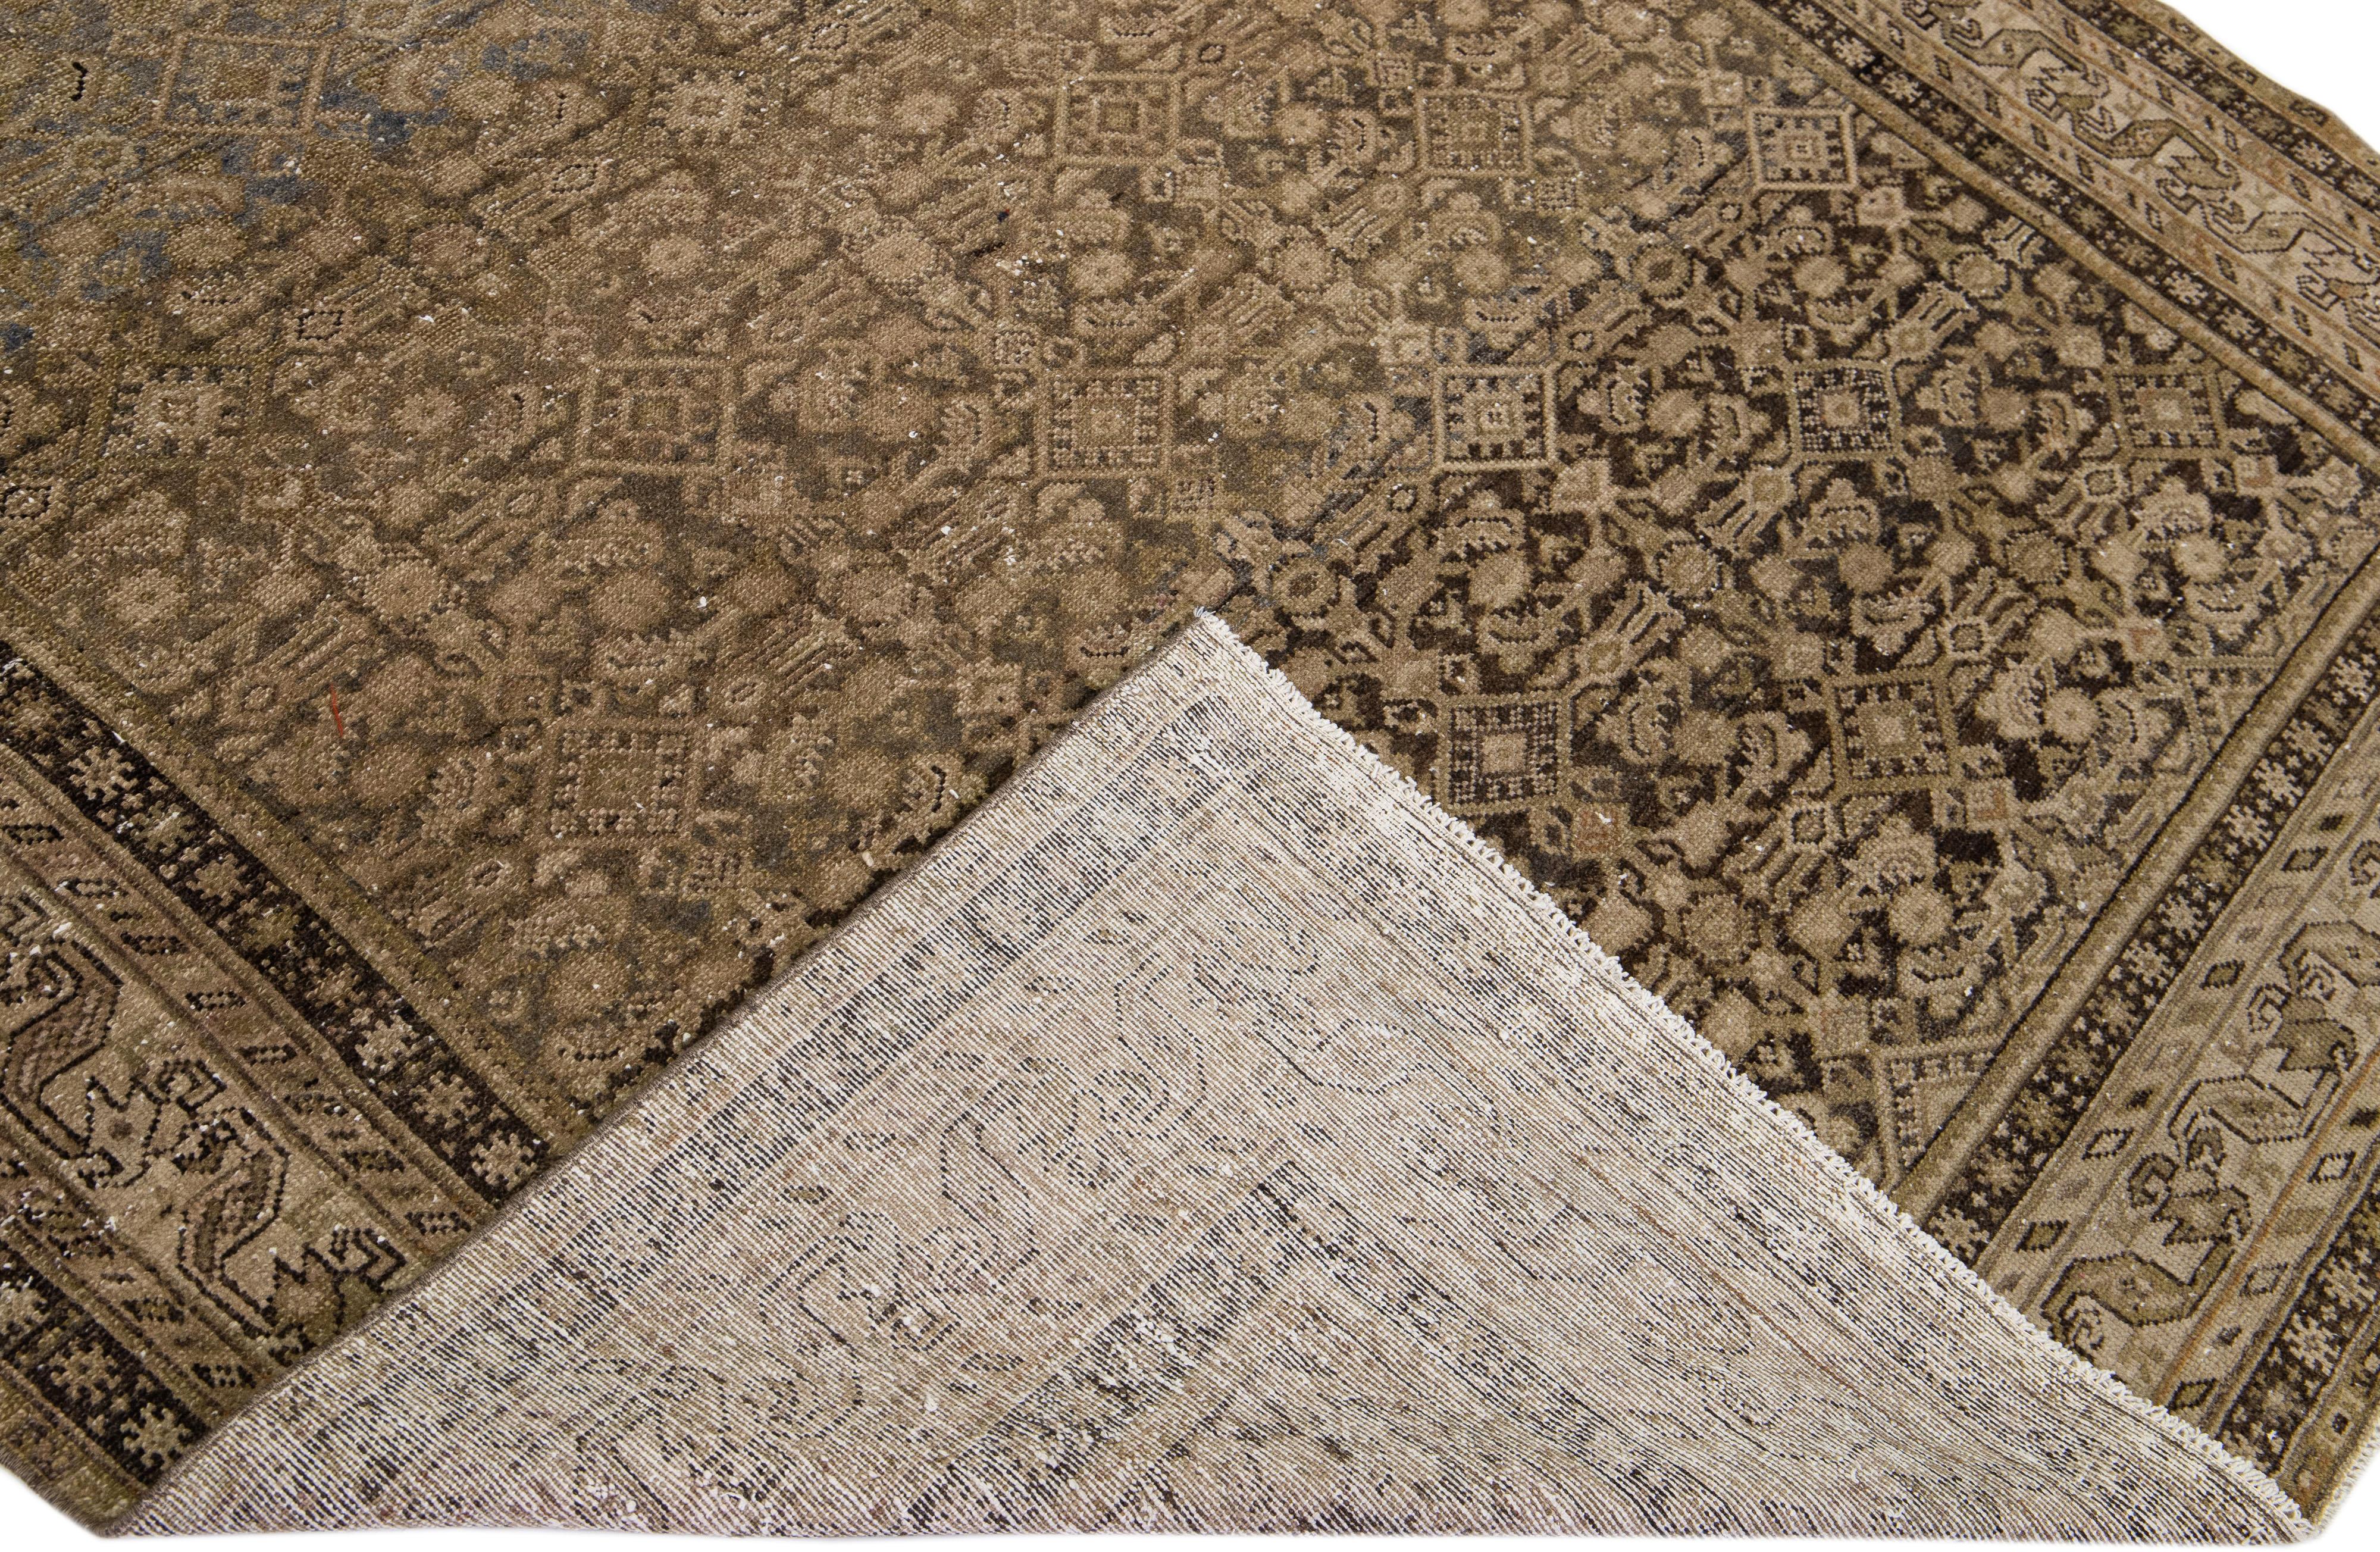 Beautiful antique Malayer hand-knotted wool rug with a tan color field. This Malayer piece has a designed frame with brown accents in a gorgeous all-over geometric design.

This rug measures: 6'4